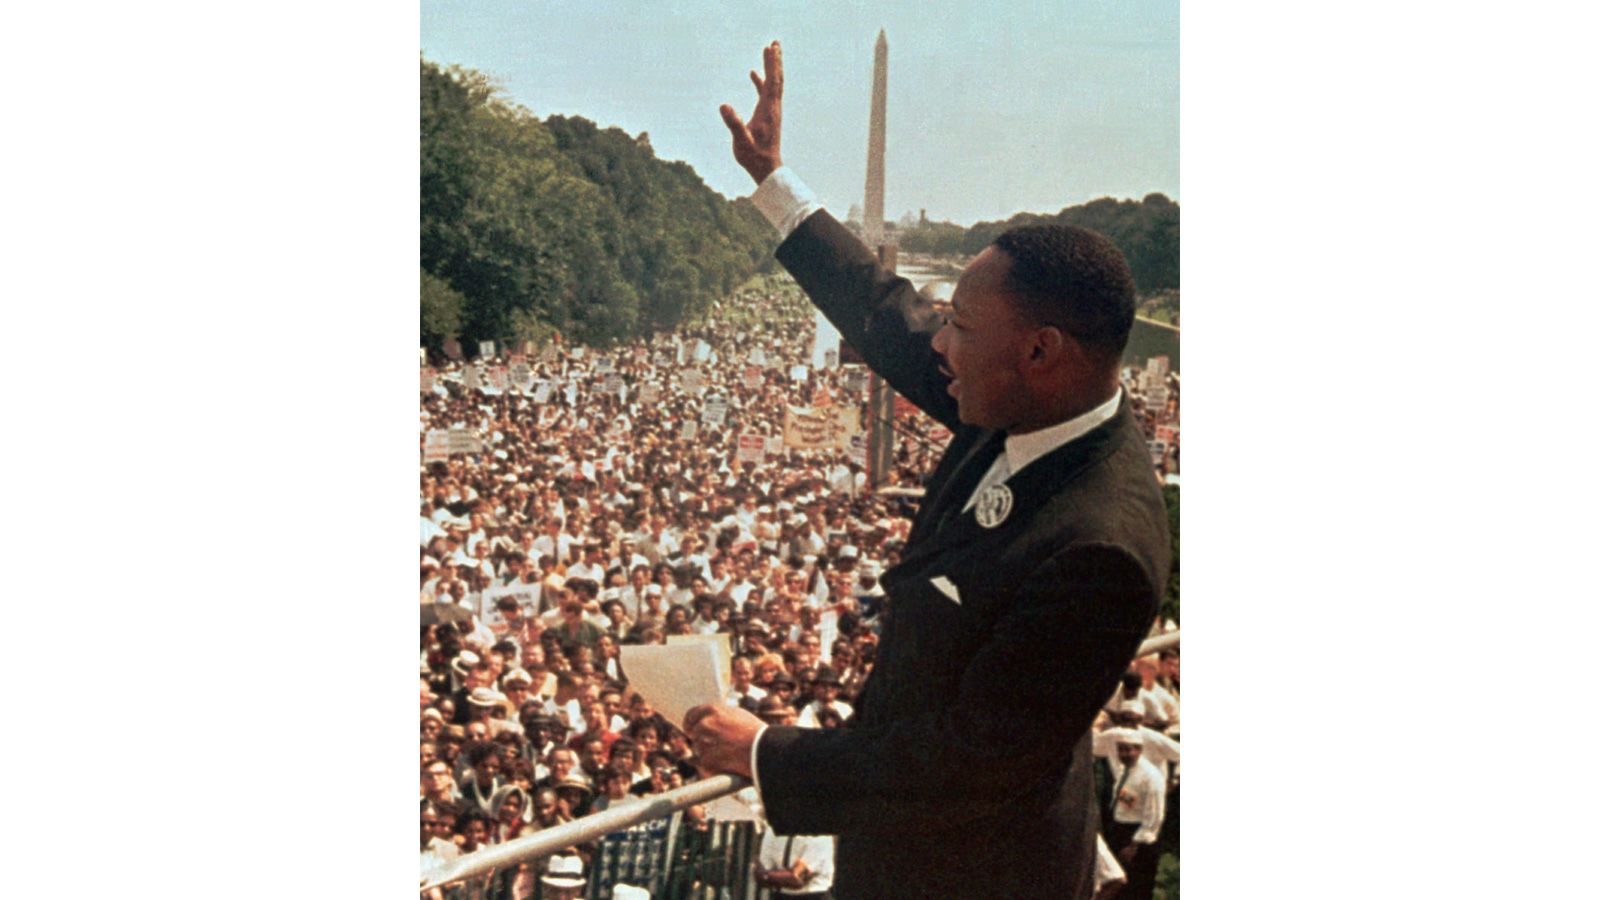 <strong>Turning point in history:</strong> Dr. Martin Luther King Jr. acknowledged the crowd at the Lincoln Memorial during his "I Have a Dream" speech on August 28, 1963.